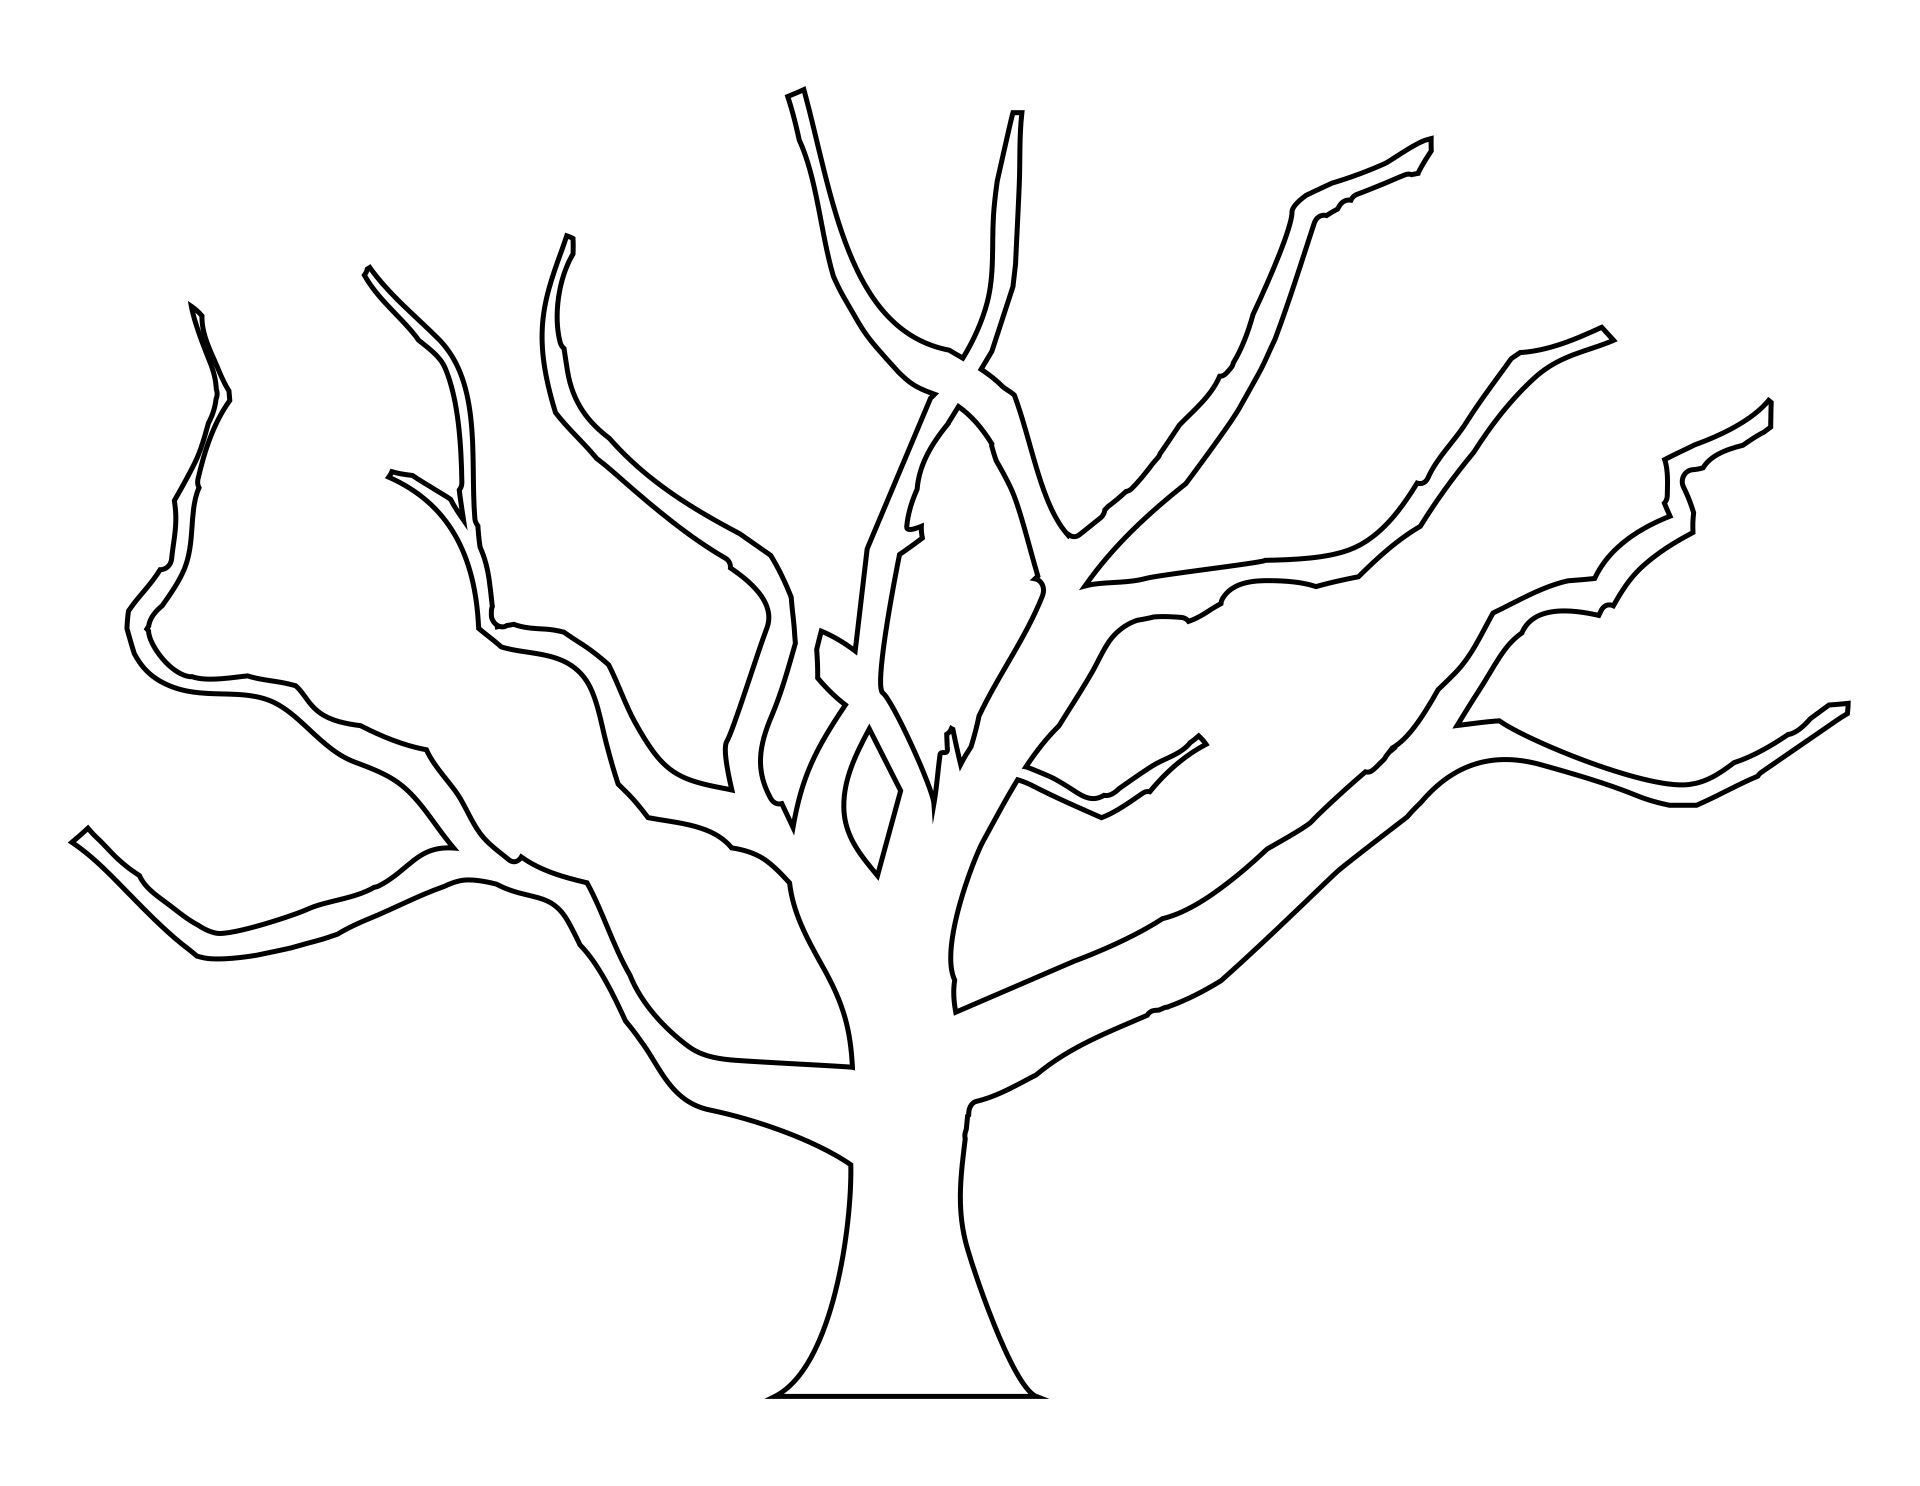 Printable Tree Without Leaves Coloring Page Leaf Coloring Page Tree 